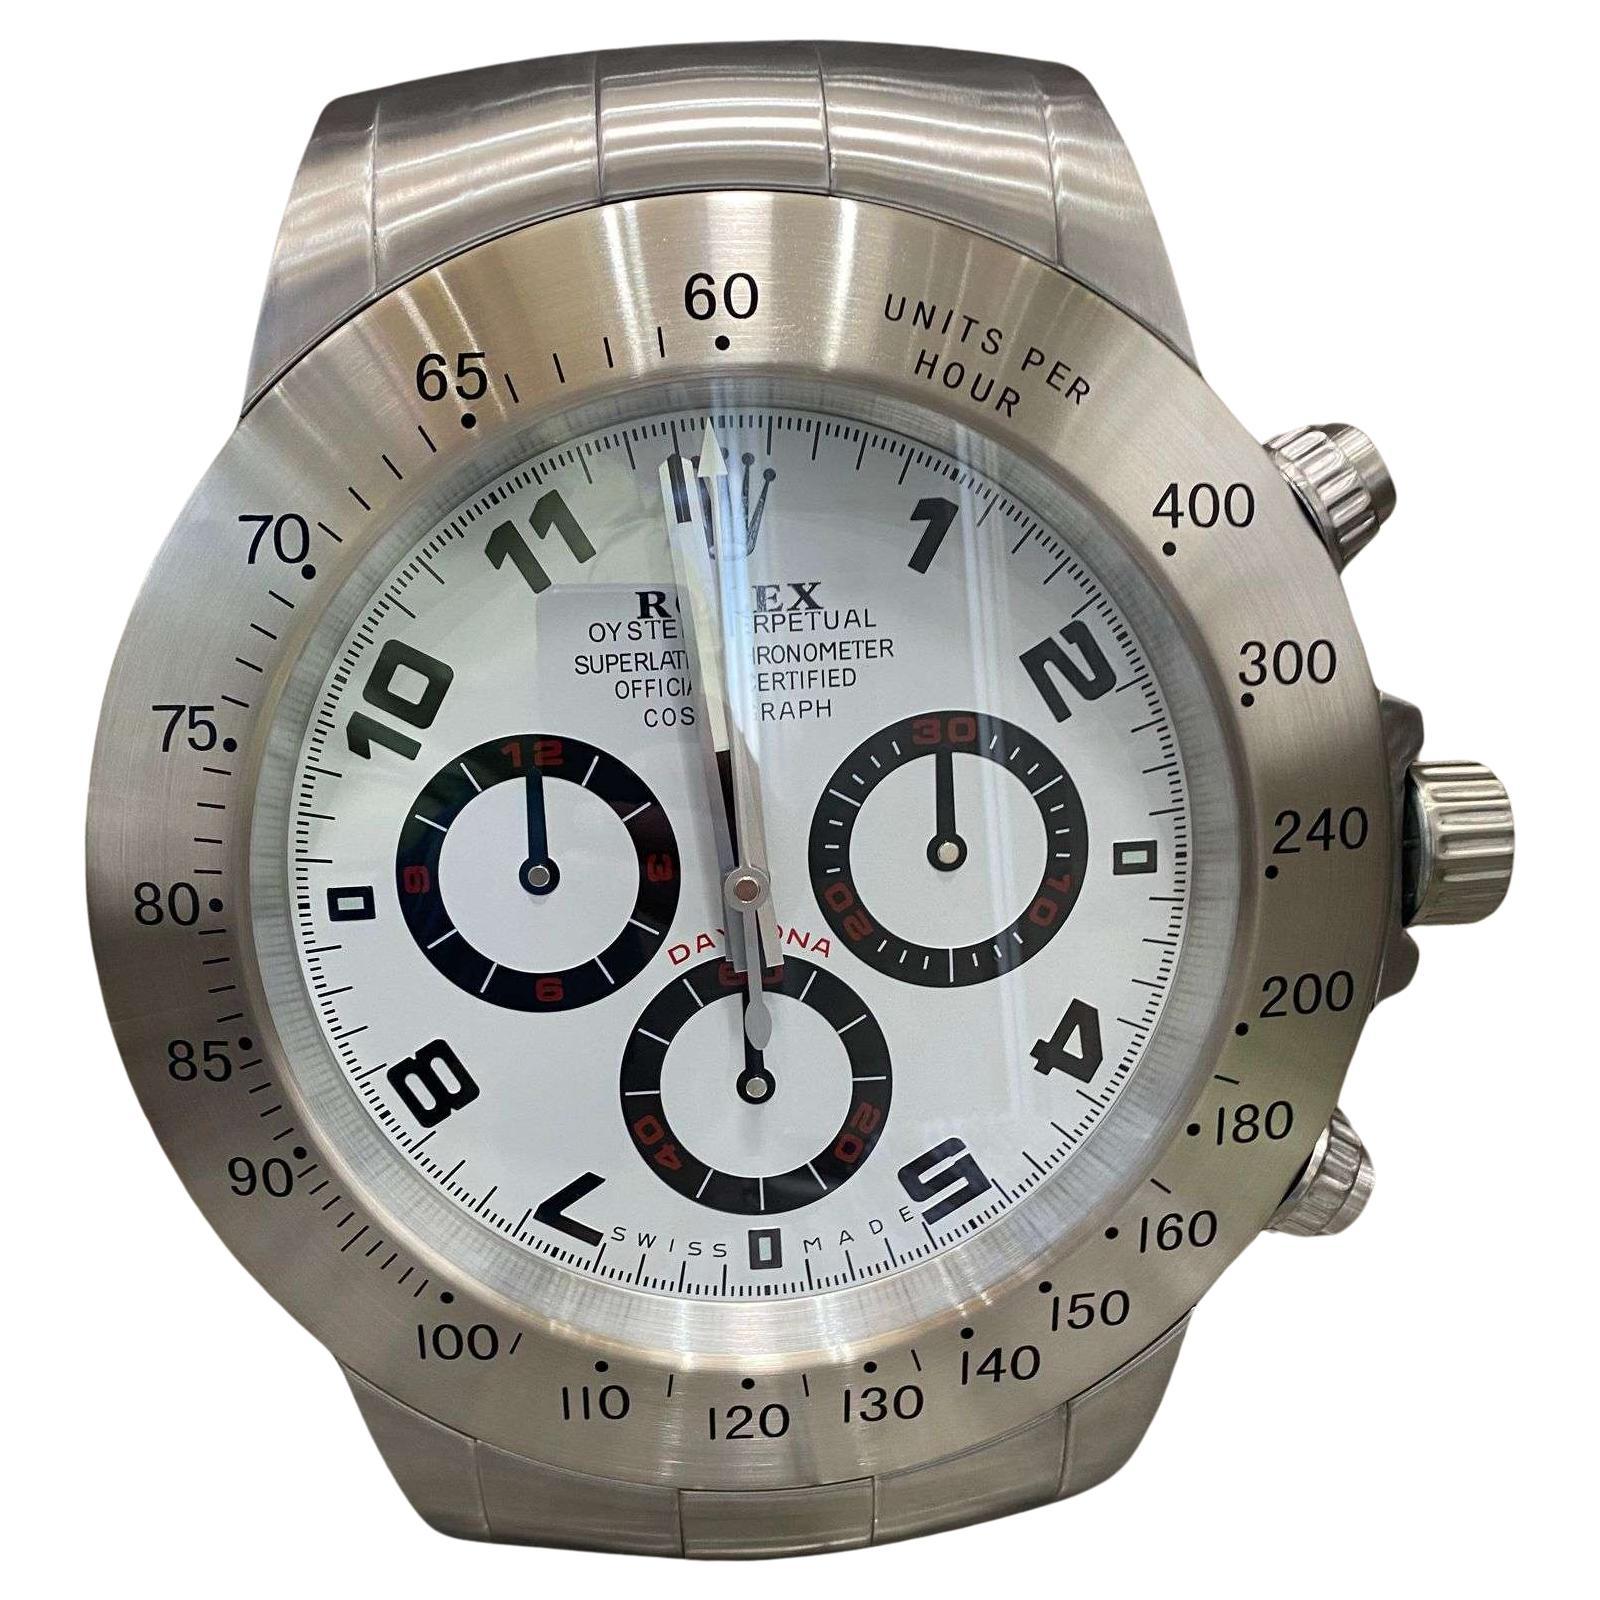 ROLEX Officially Certified Oyster Perpetual Silver Daytona Wall Clock 